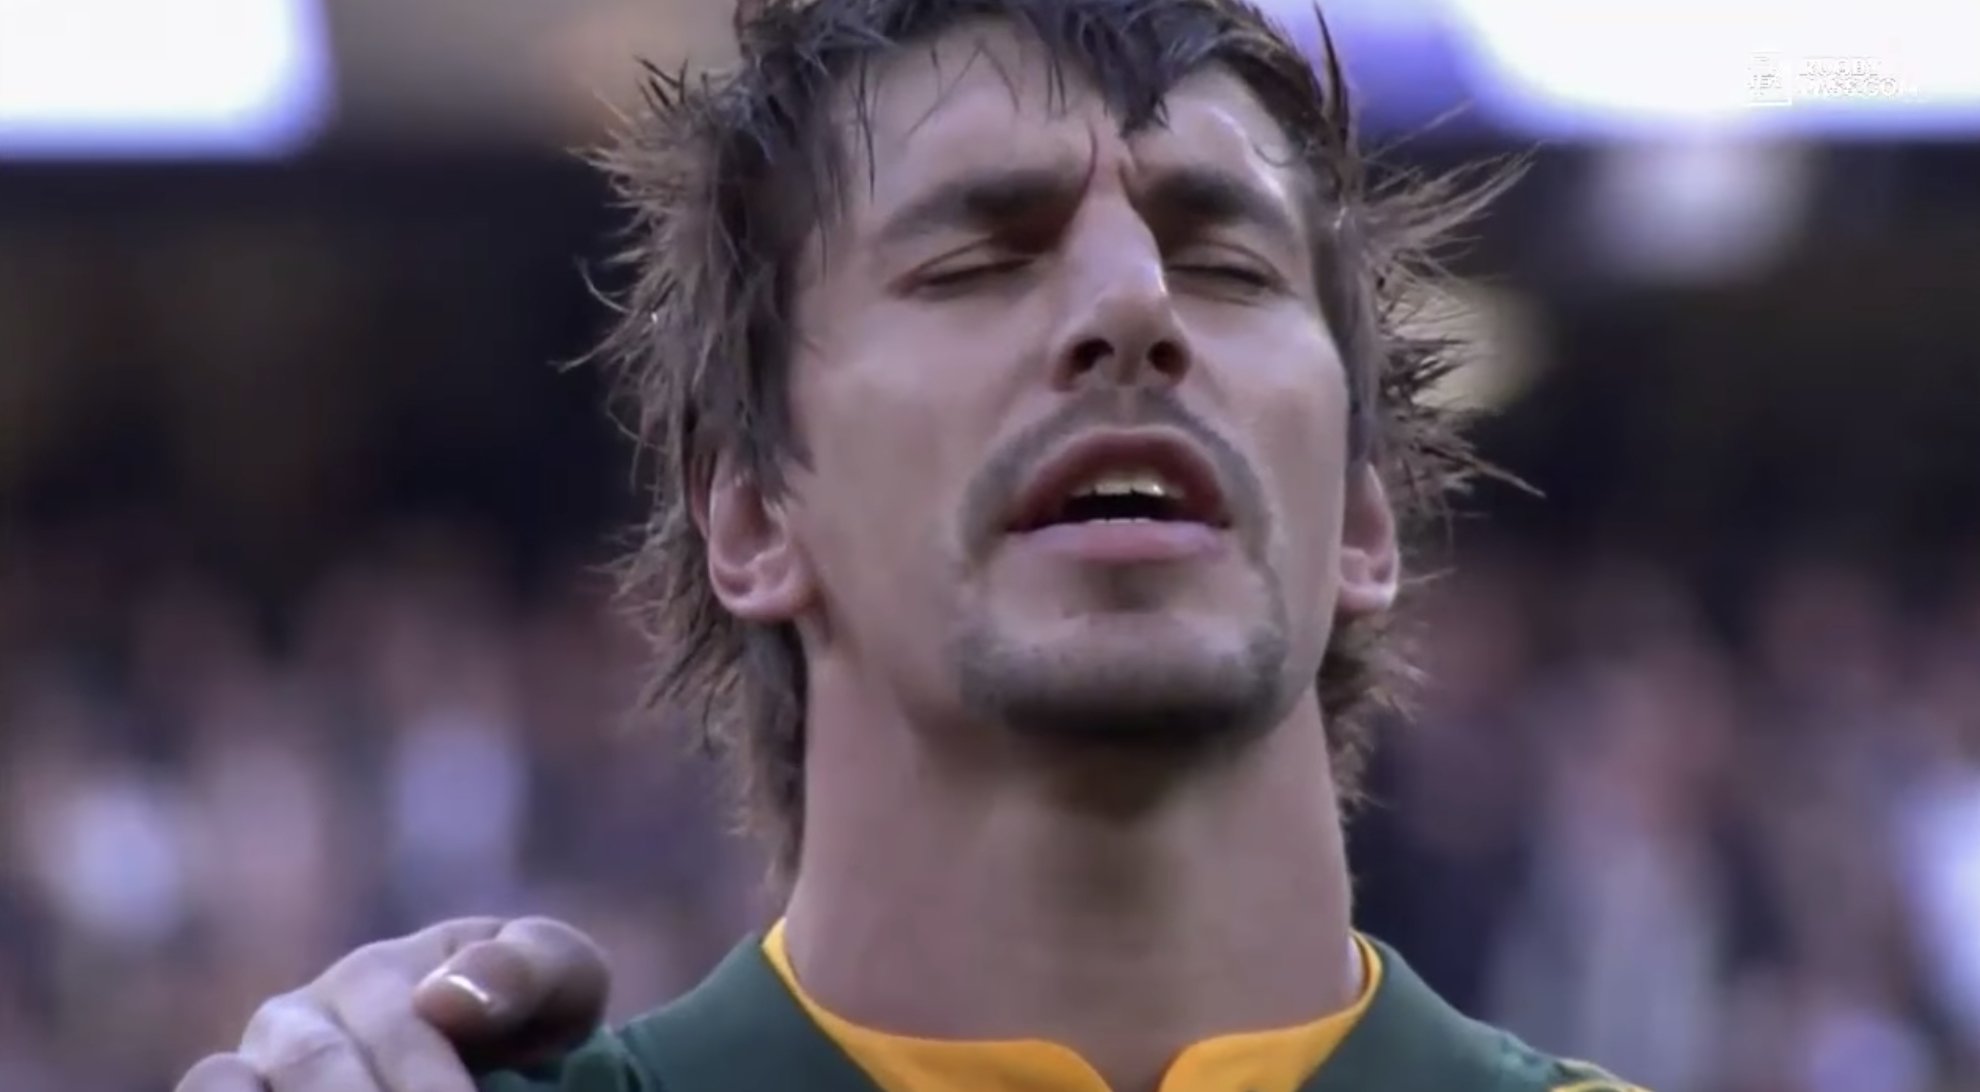 WATCH: South Africa 2019 HYPE video will have Springbok fans absolutely rigid